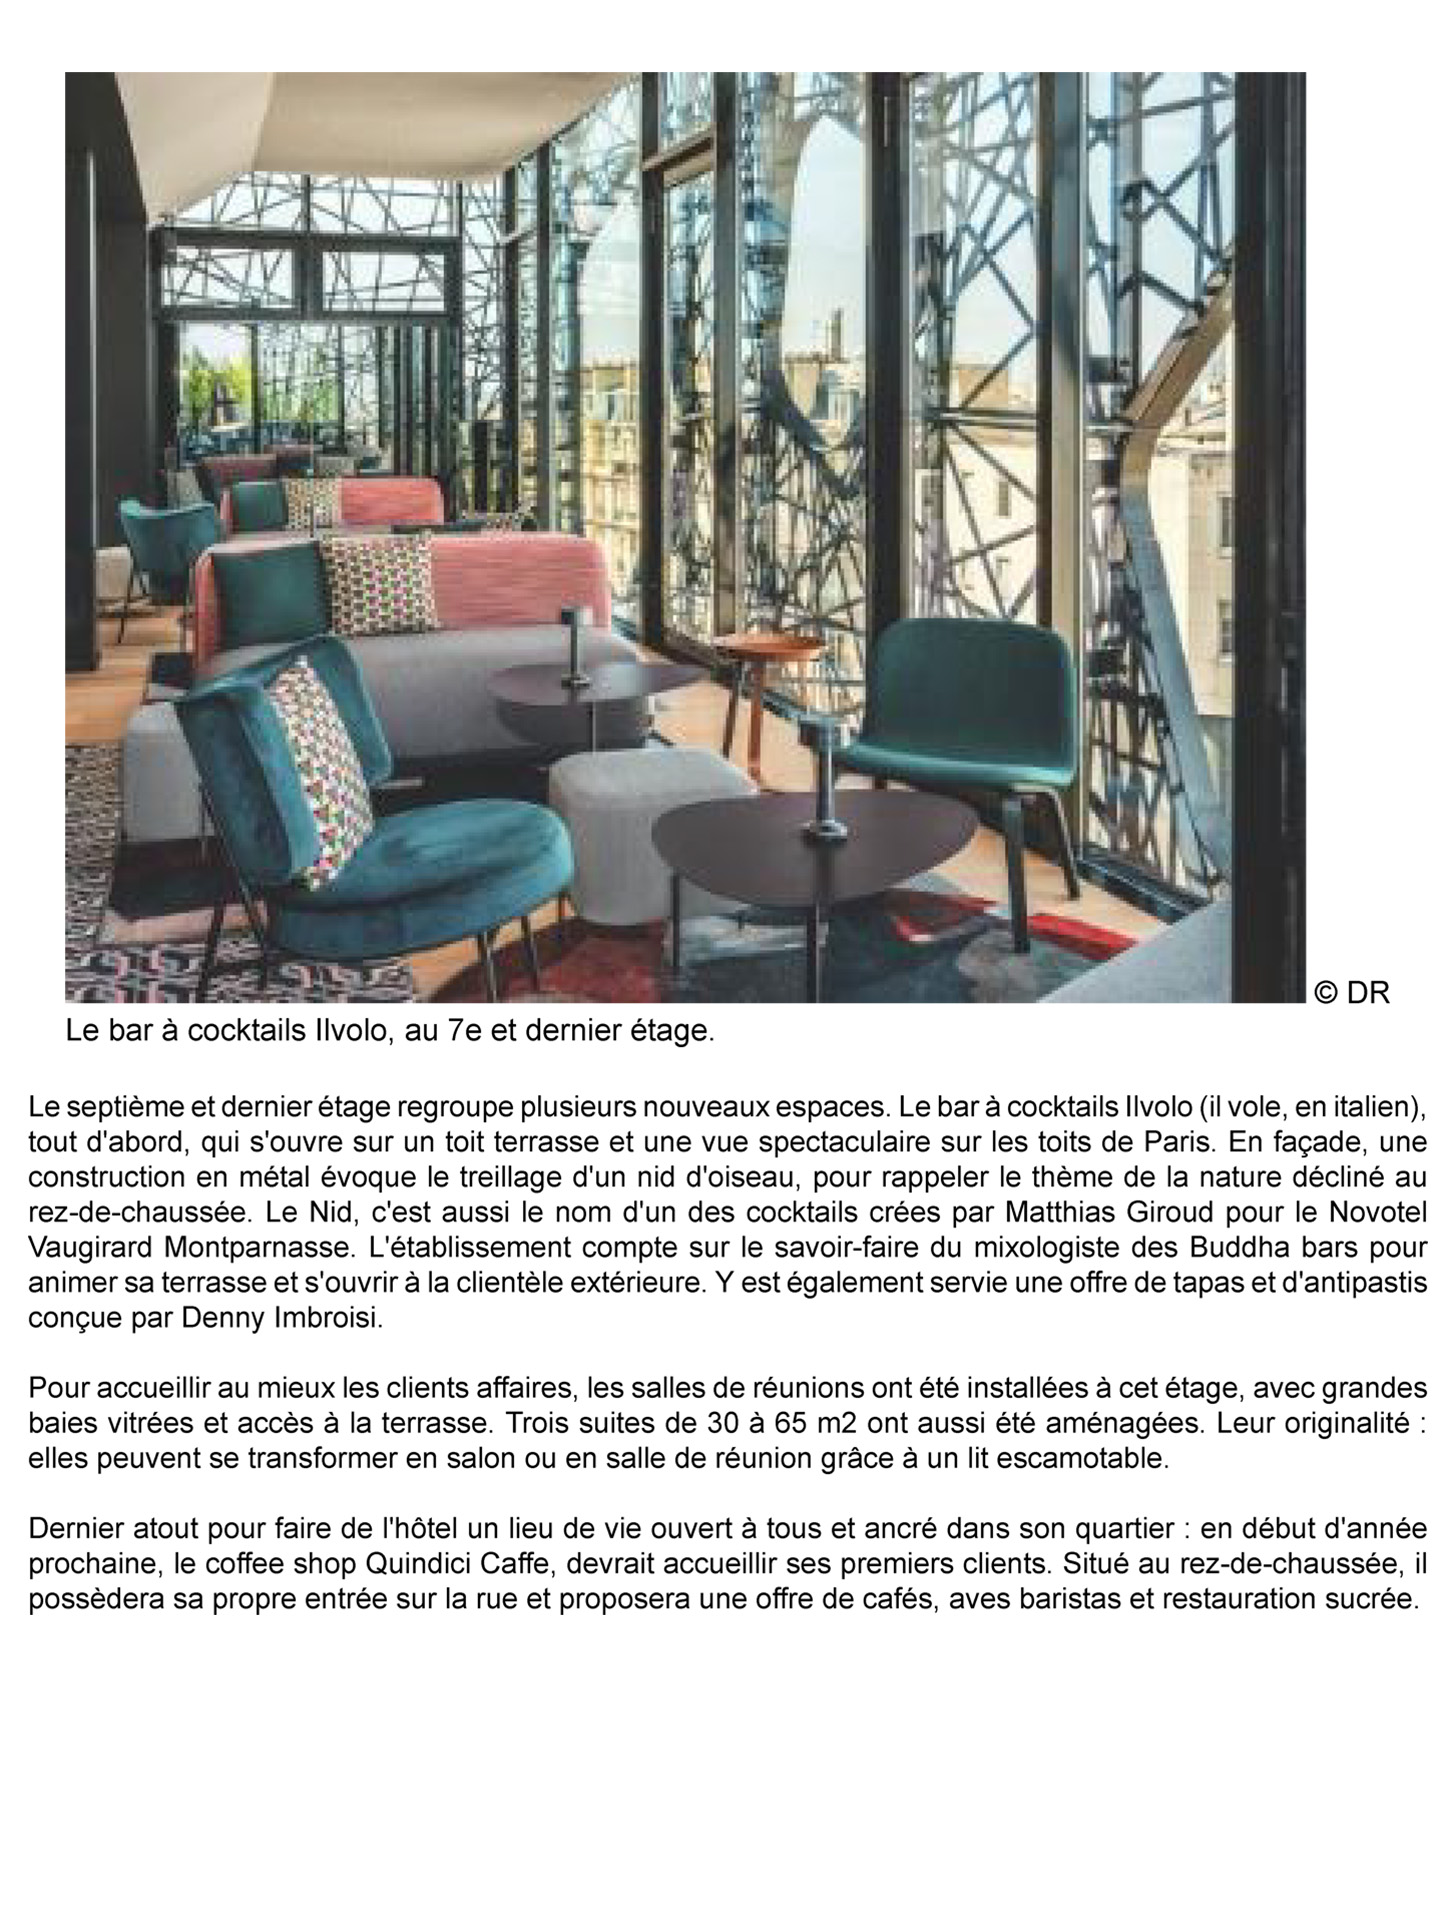 Article on Novotel Paris Vaugirard Montparnasse renovated by the interior design studio jean-philippe nuel, decoration inspired by nature, 4 star hotel, hotel and restaurant magazine